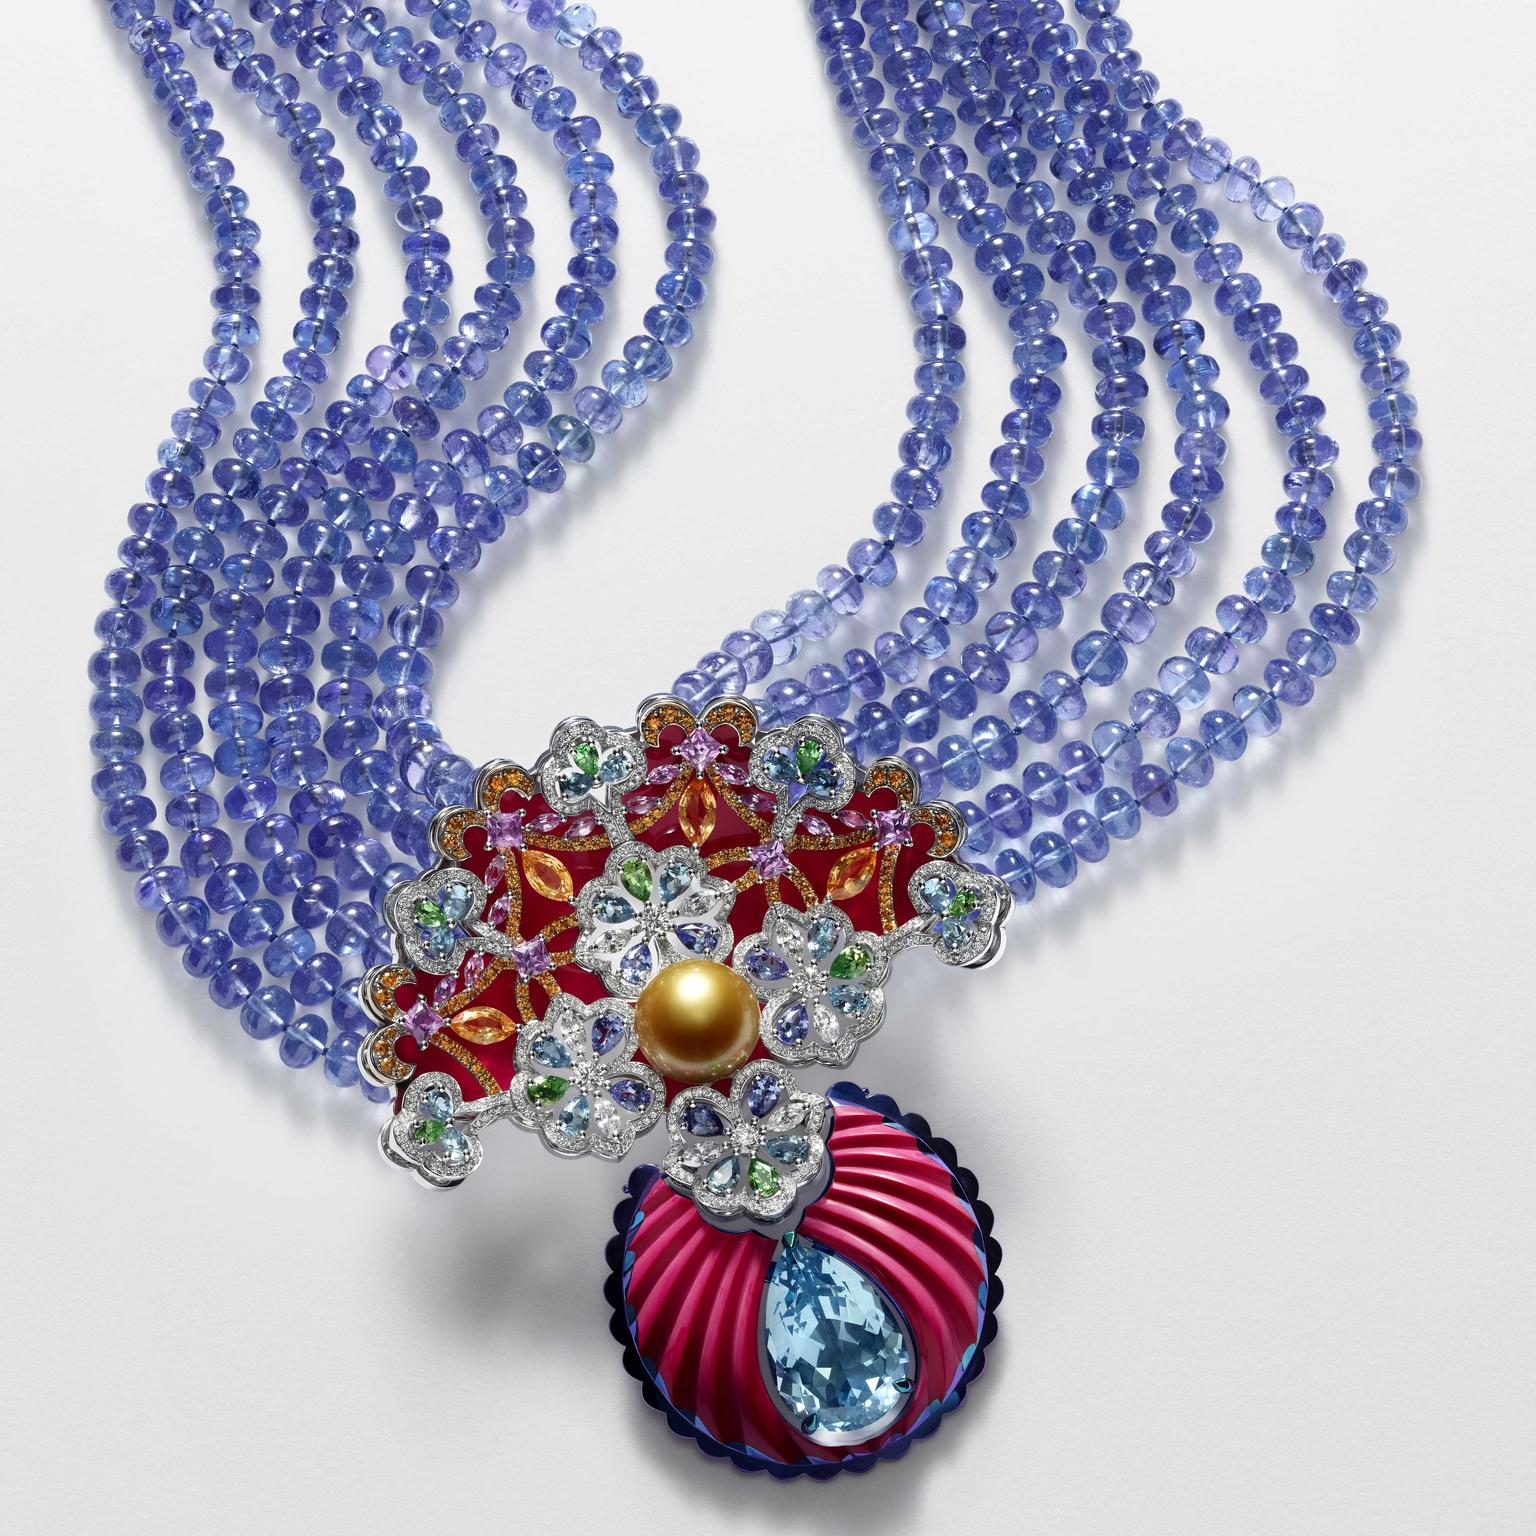 Chopard tanzanite and aquamarine necklace from Red Carpet collection 2018